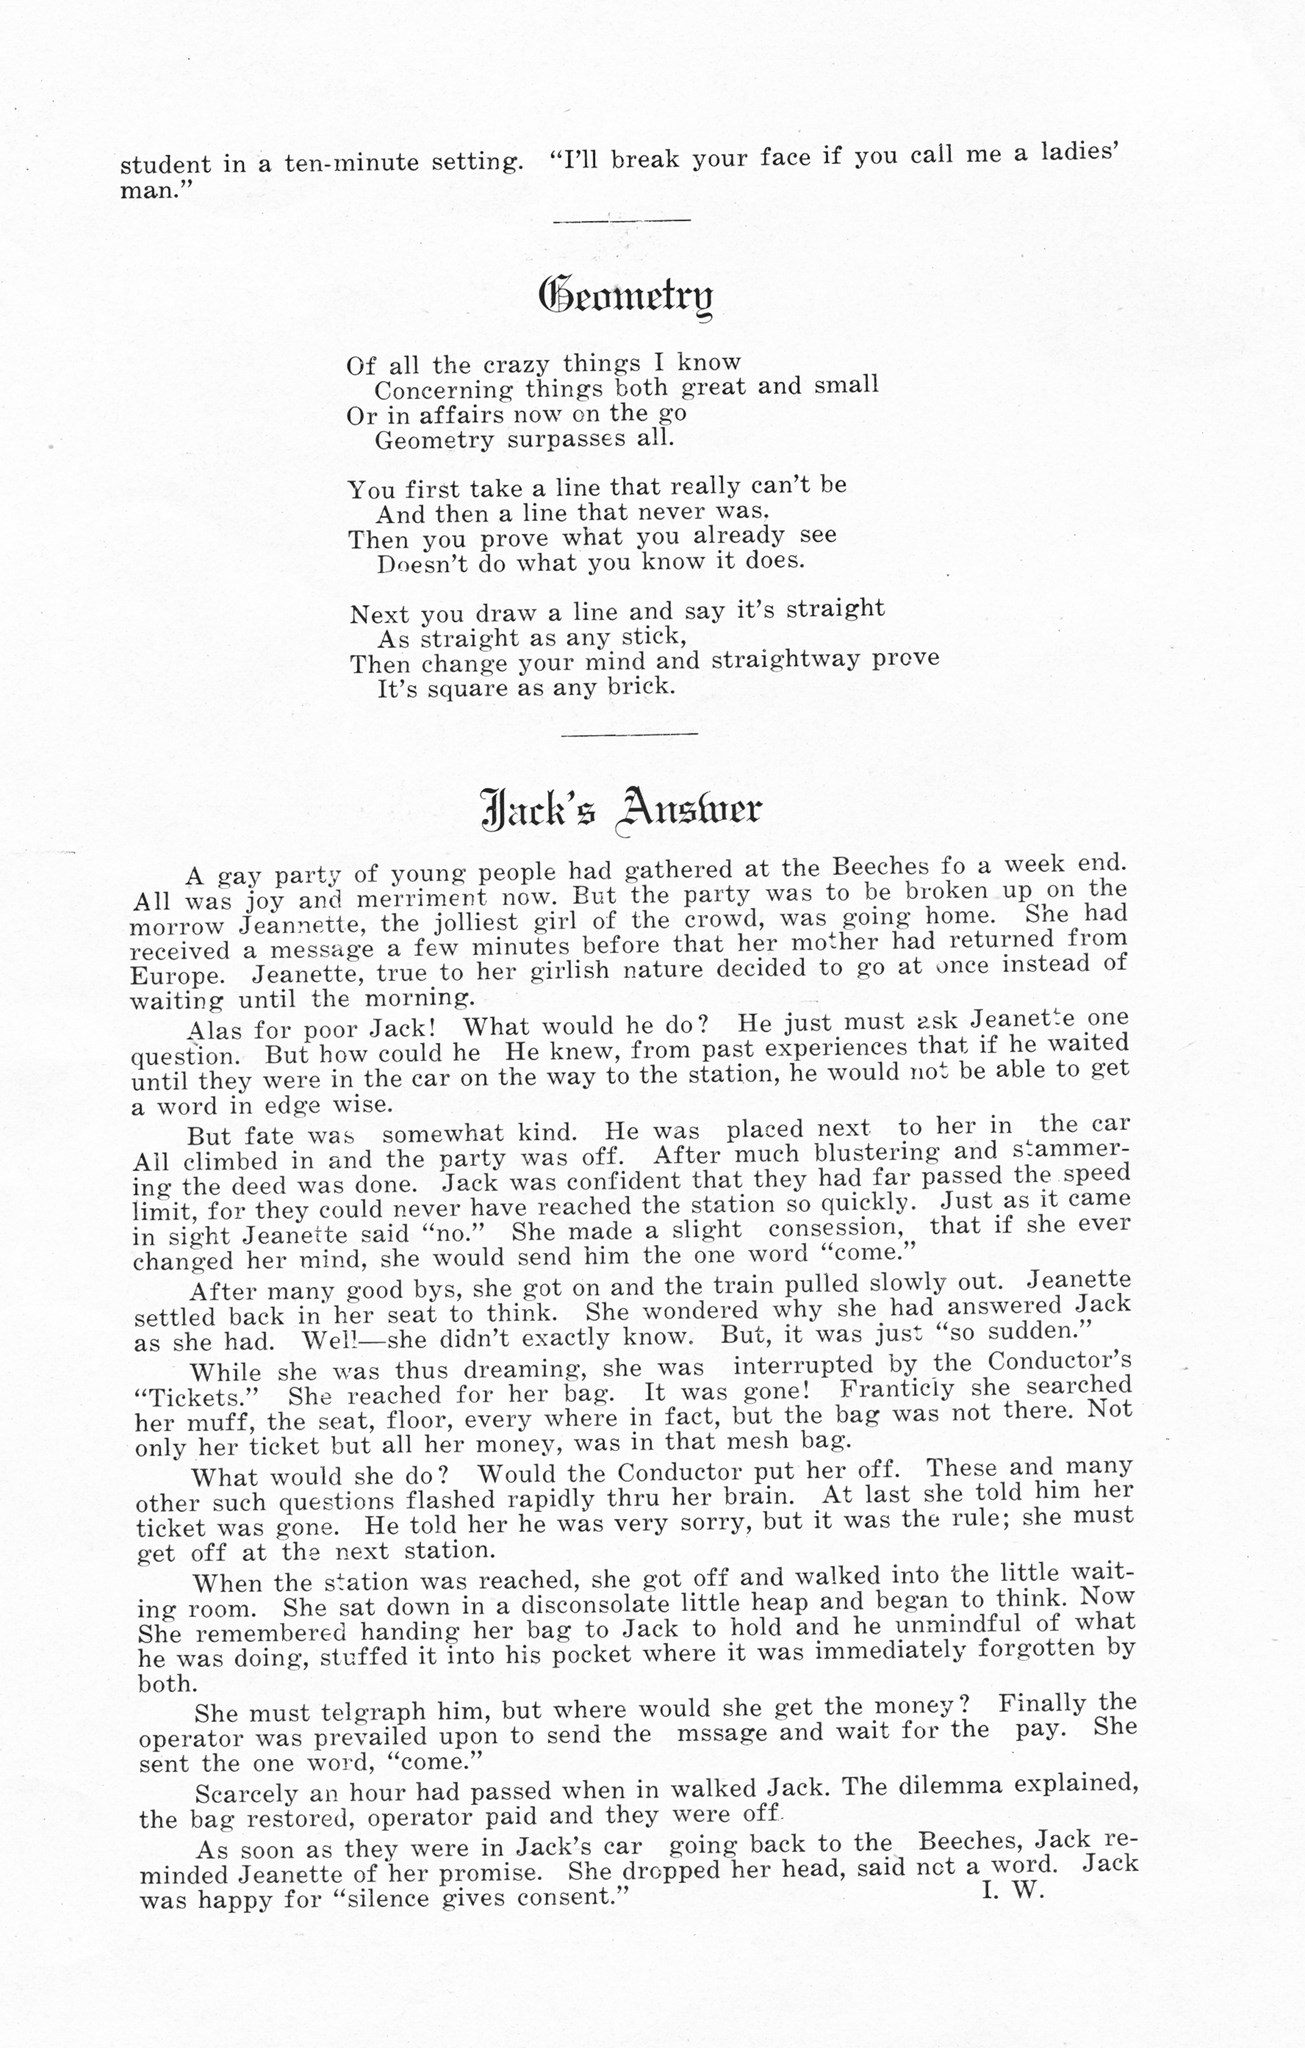 ../../../Images/Large/1912/Arclight-1912-pg0064.jpg